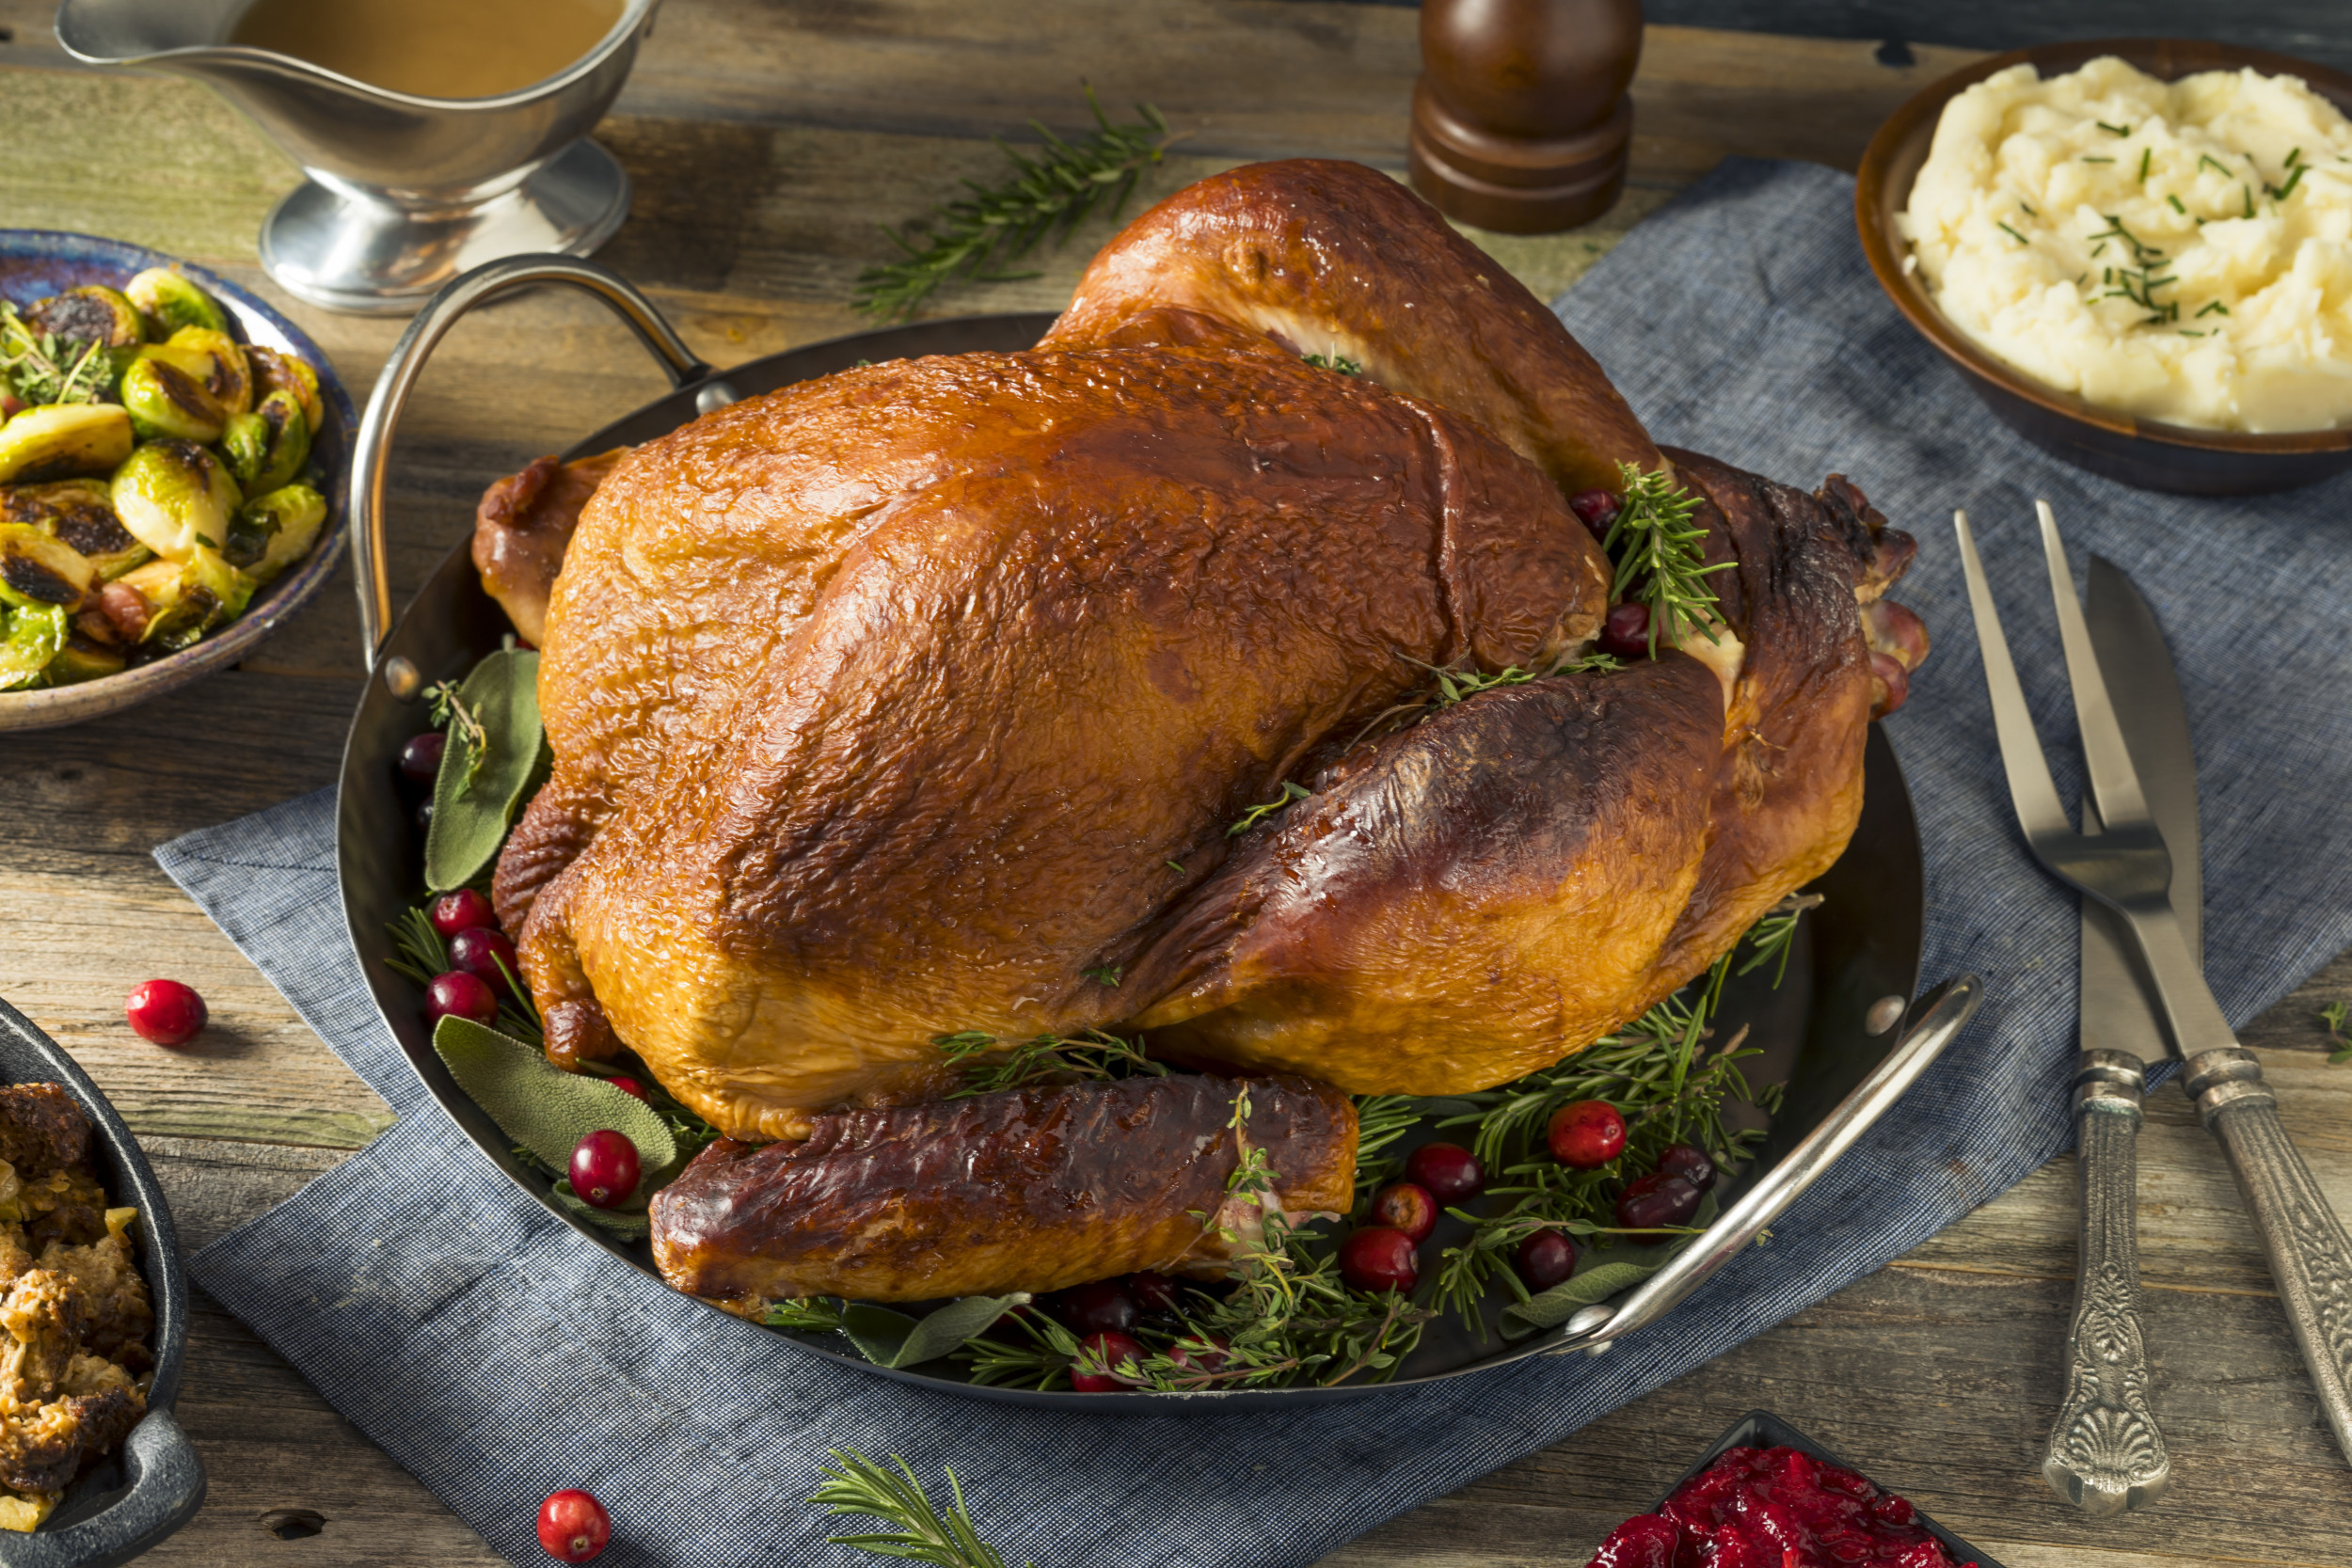 How Long Can You Keep A Frozen Turkey And How To Defrost Your Thanksgiving Bird Properly